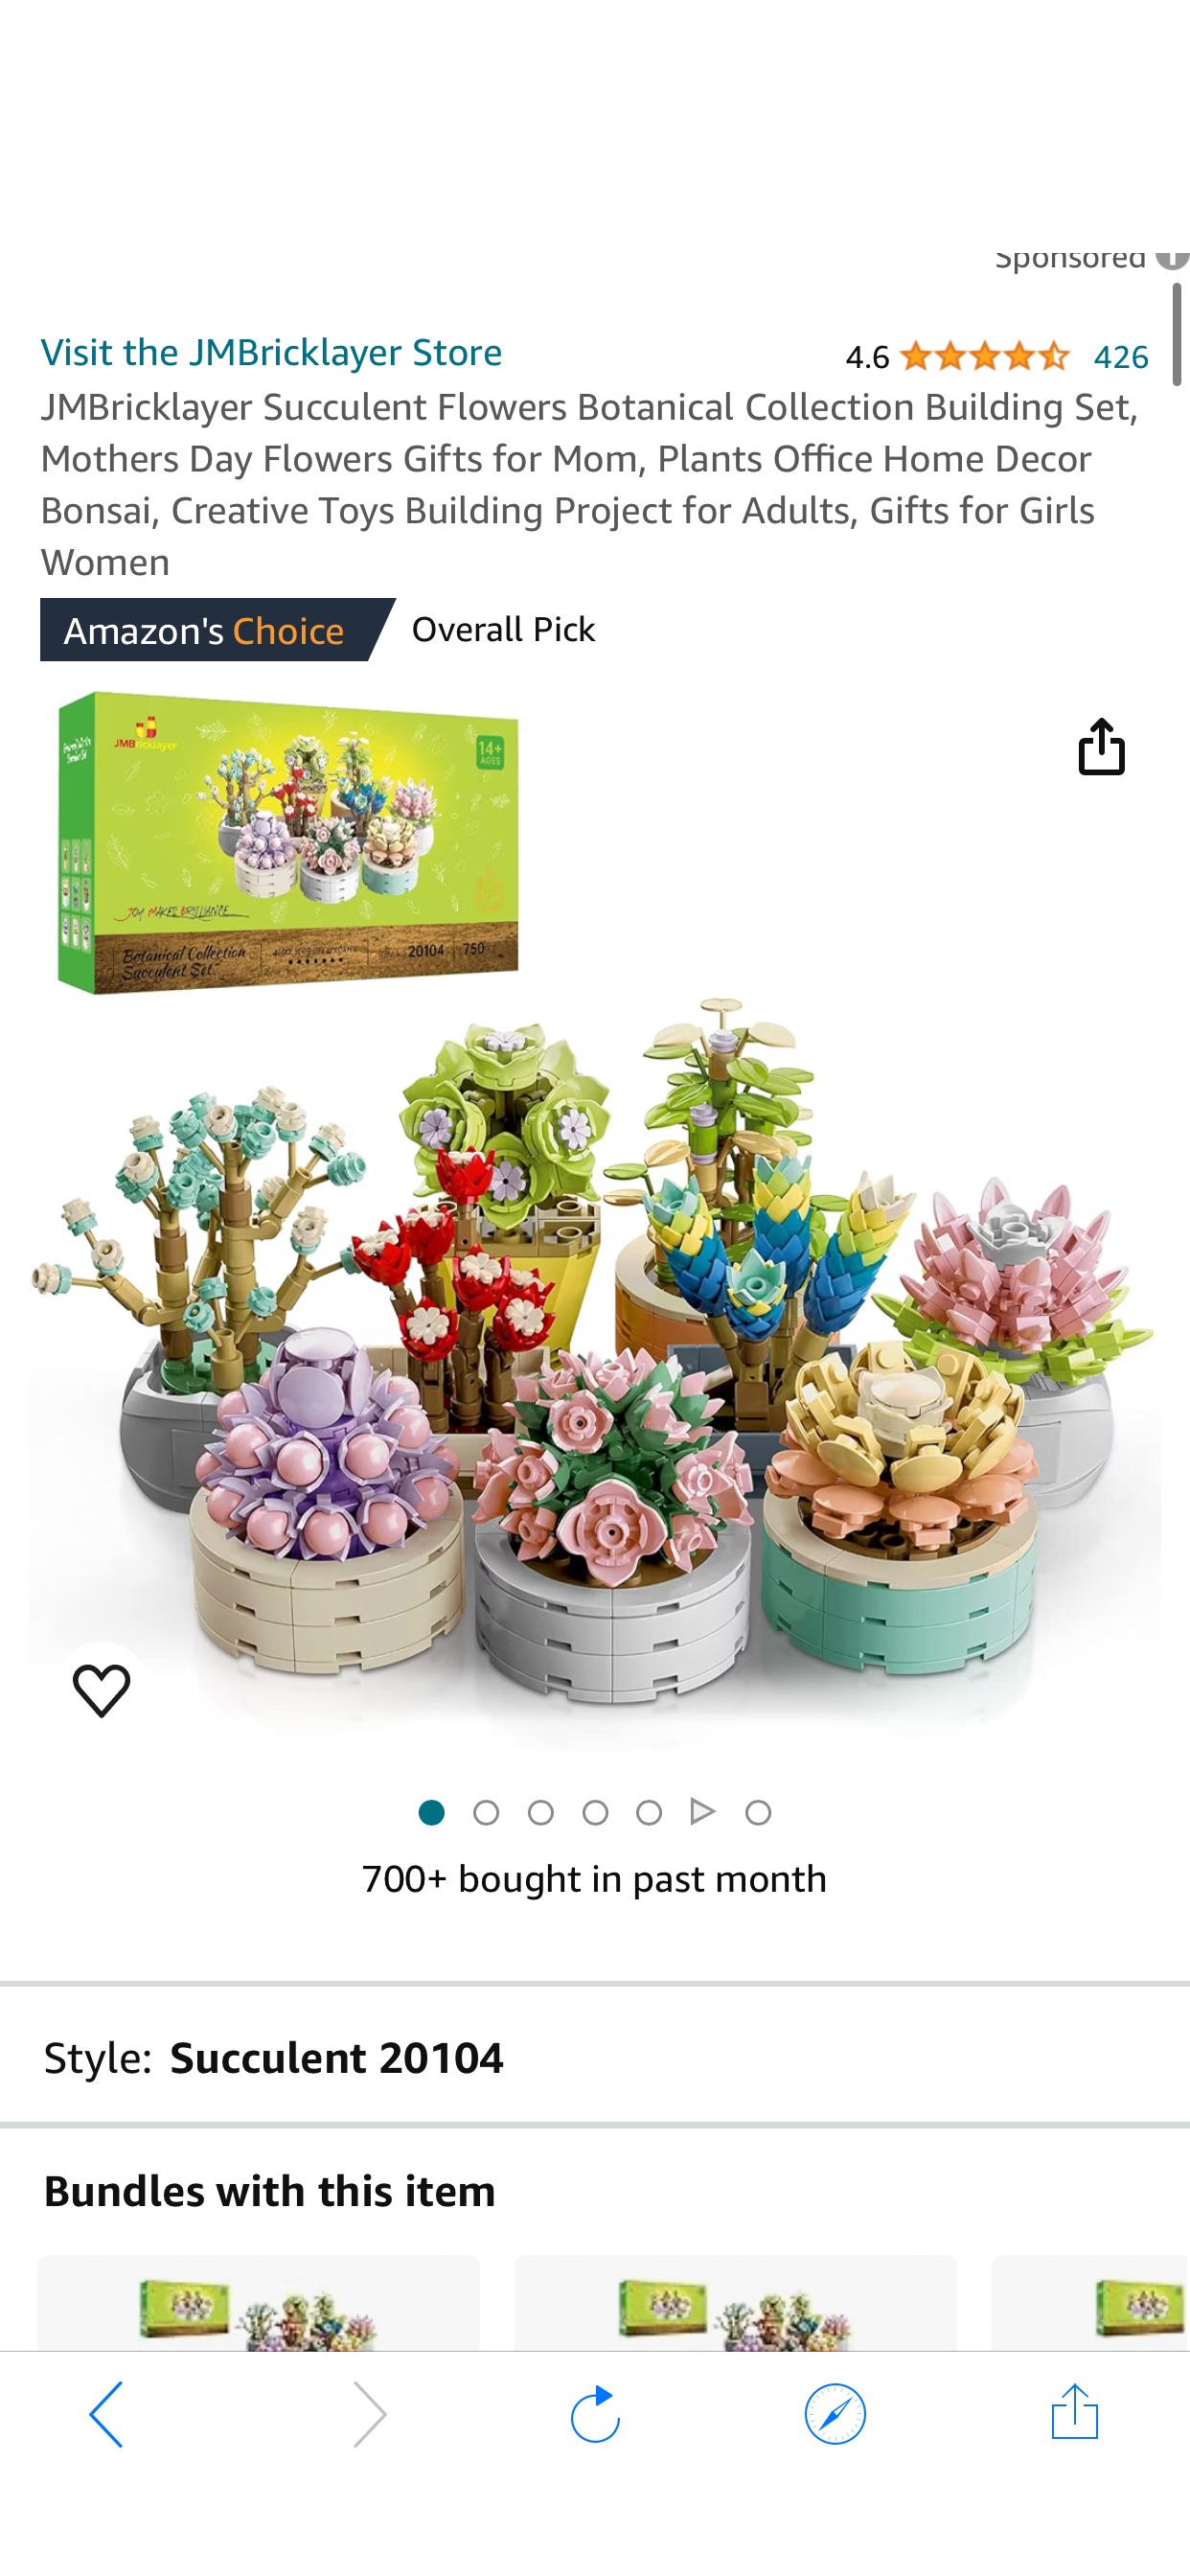 Amazon.com: JMBricklayer Succulent Flowers Botanical Collection Building Set, Mothers Day Flowers Gifts for Mom, Plants Office Home Decor Bonsai, Creative Toys Building Project for Adults, Gifts for G